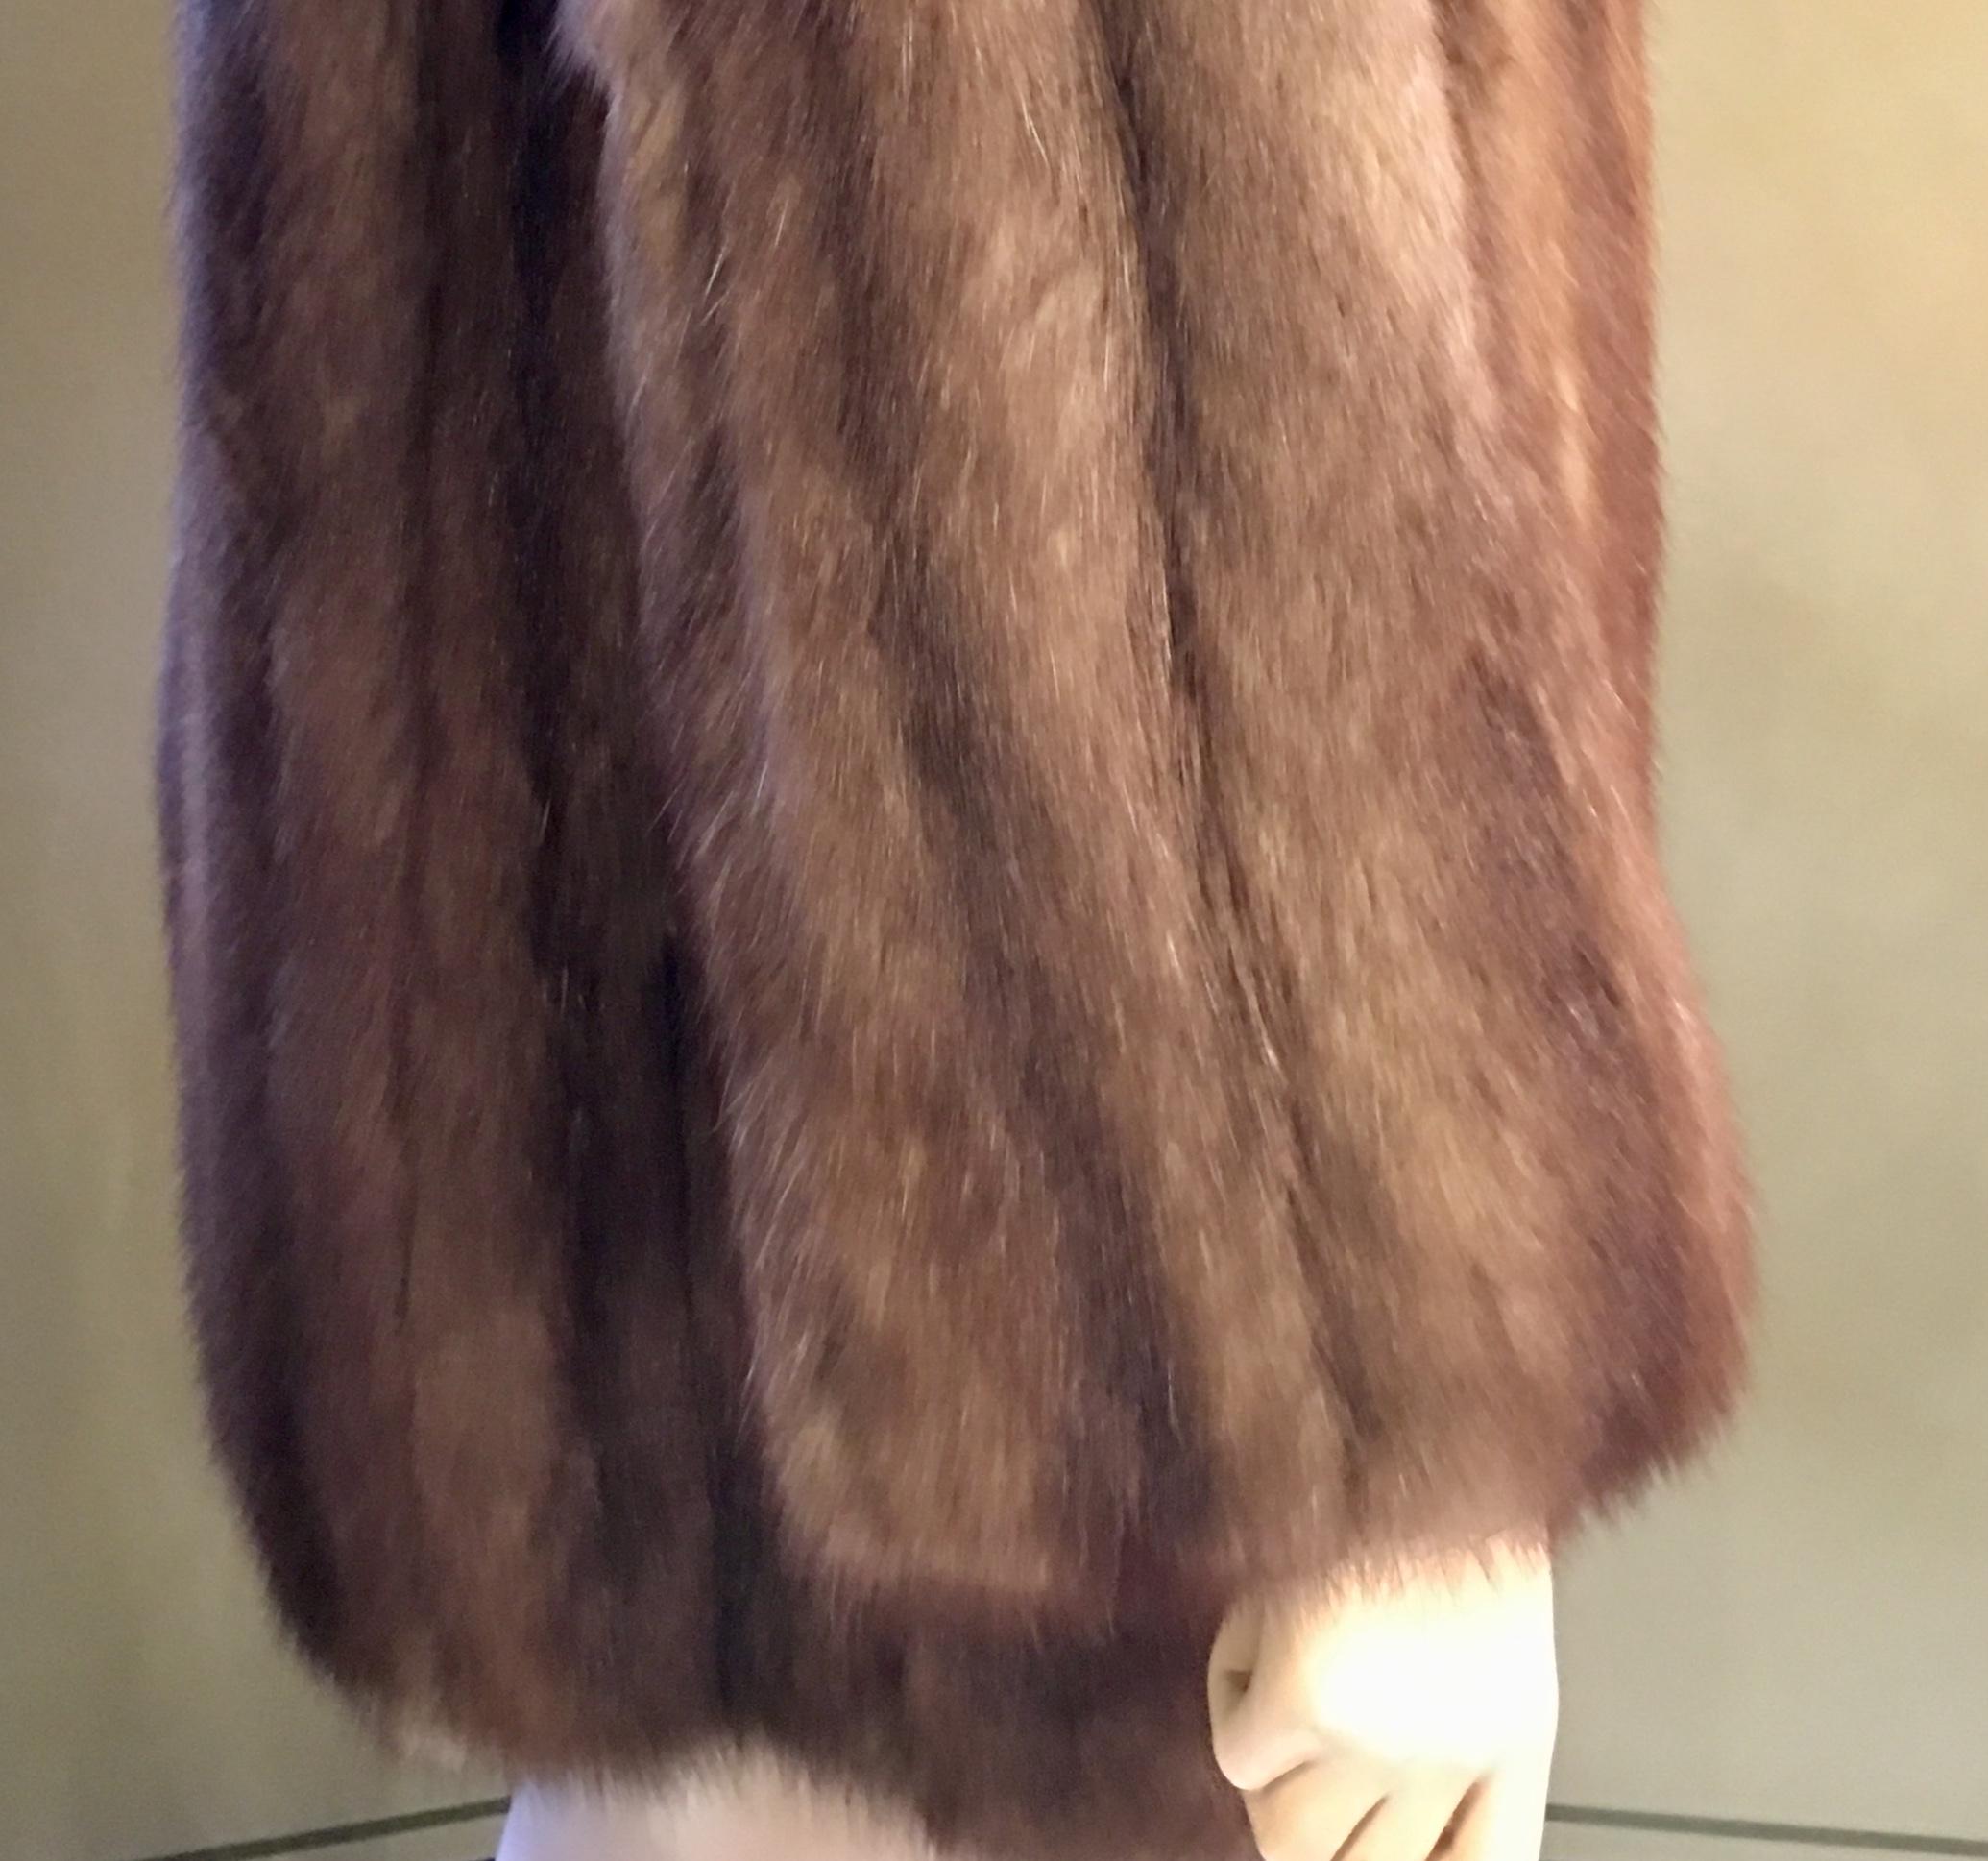 Supreme Opulent Russian Sable Fur Stroller Length Coat  In Excellent Condition For Sale In Tustin, CA